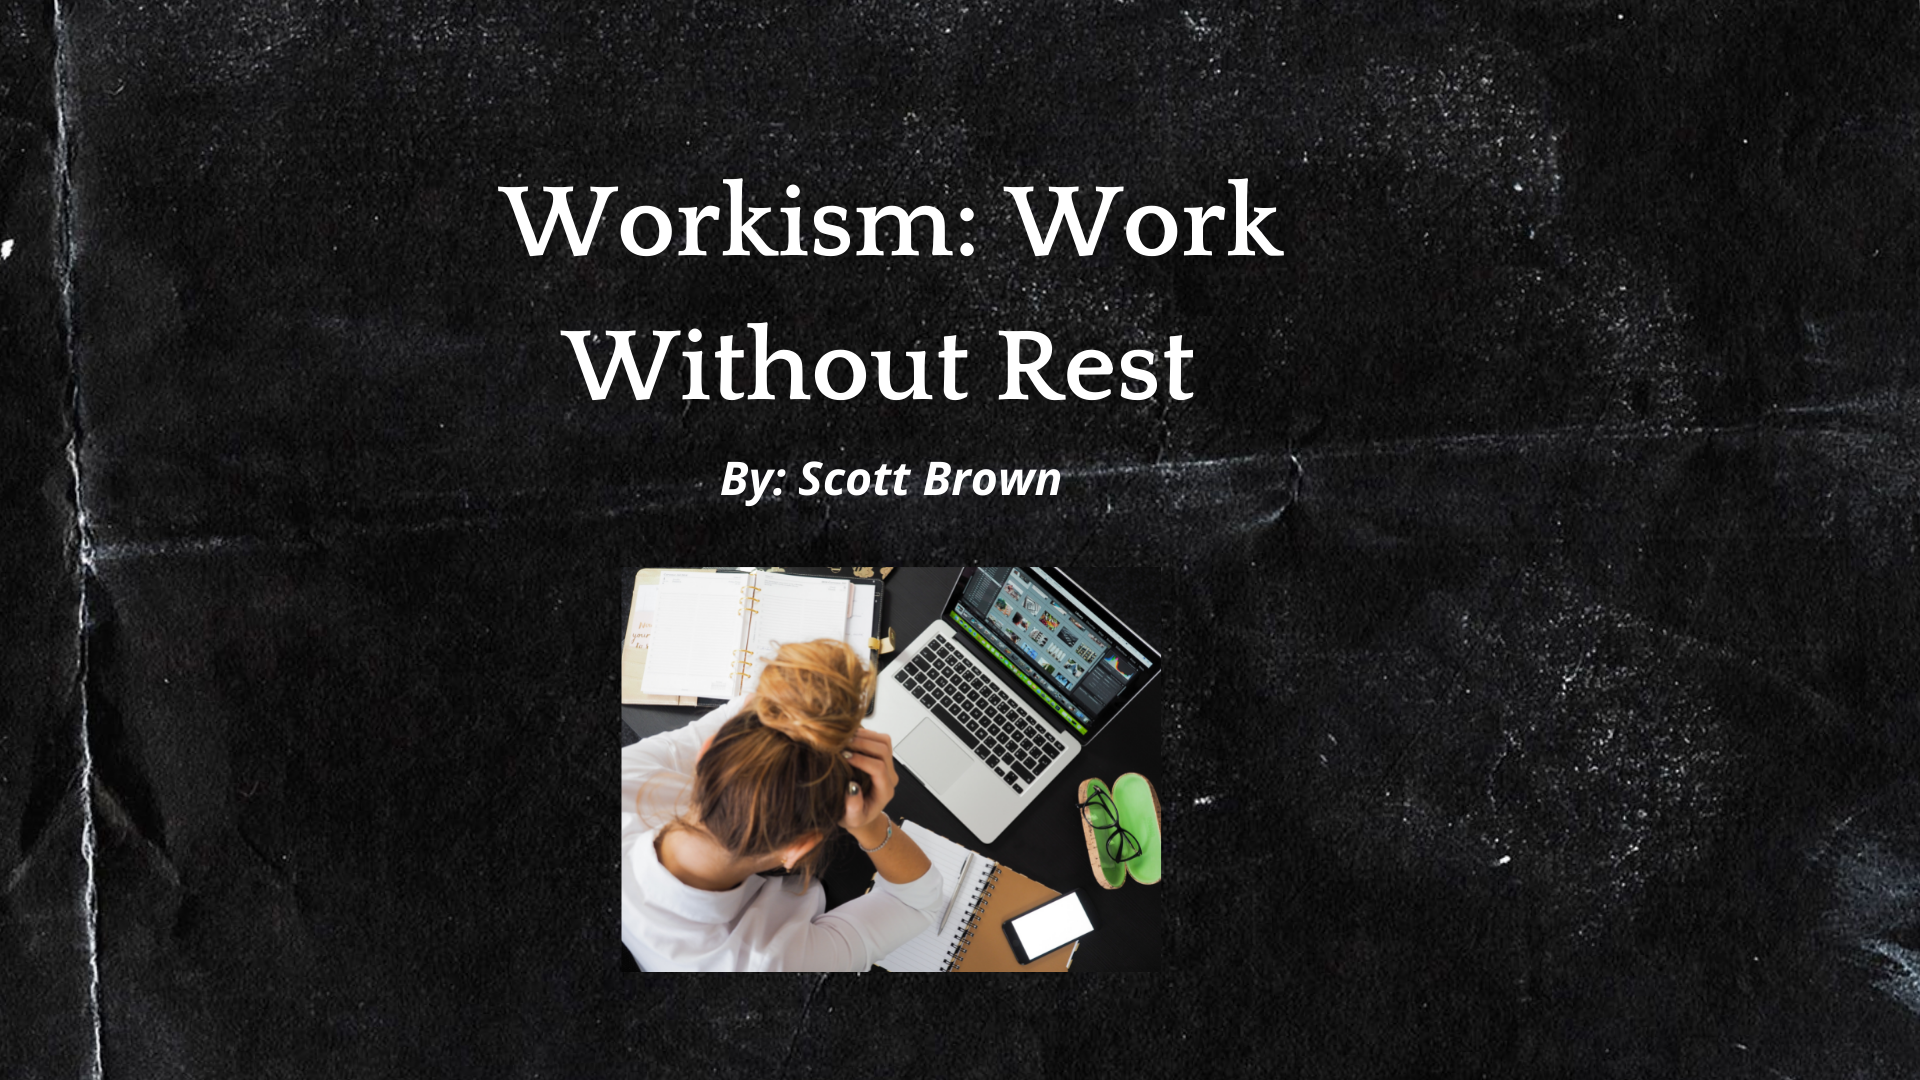 Workism: Working Without Rest